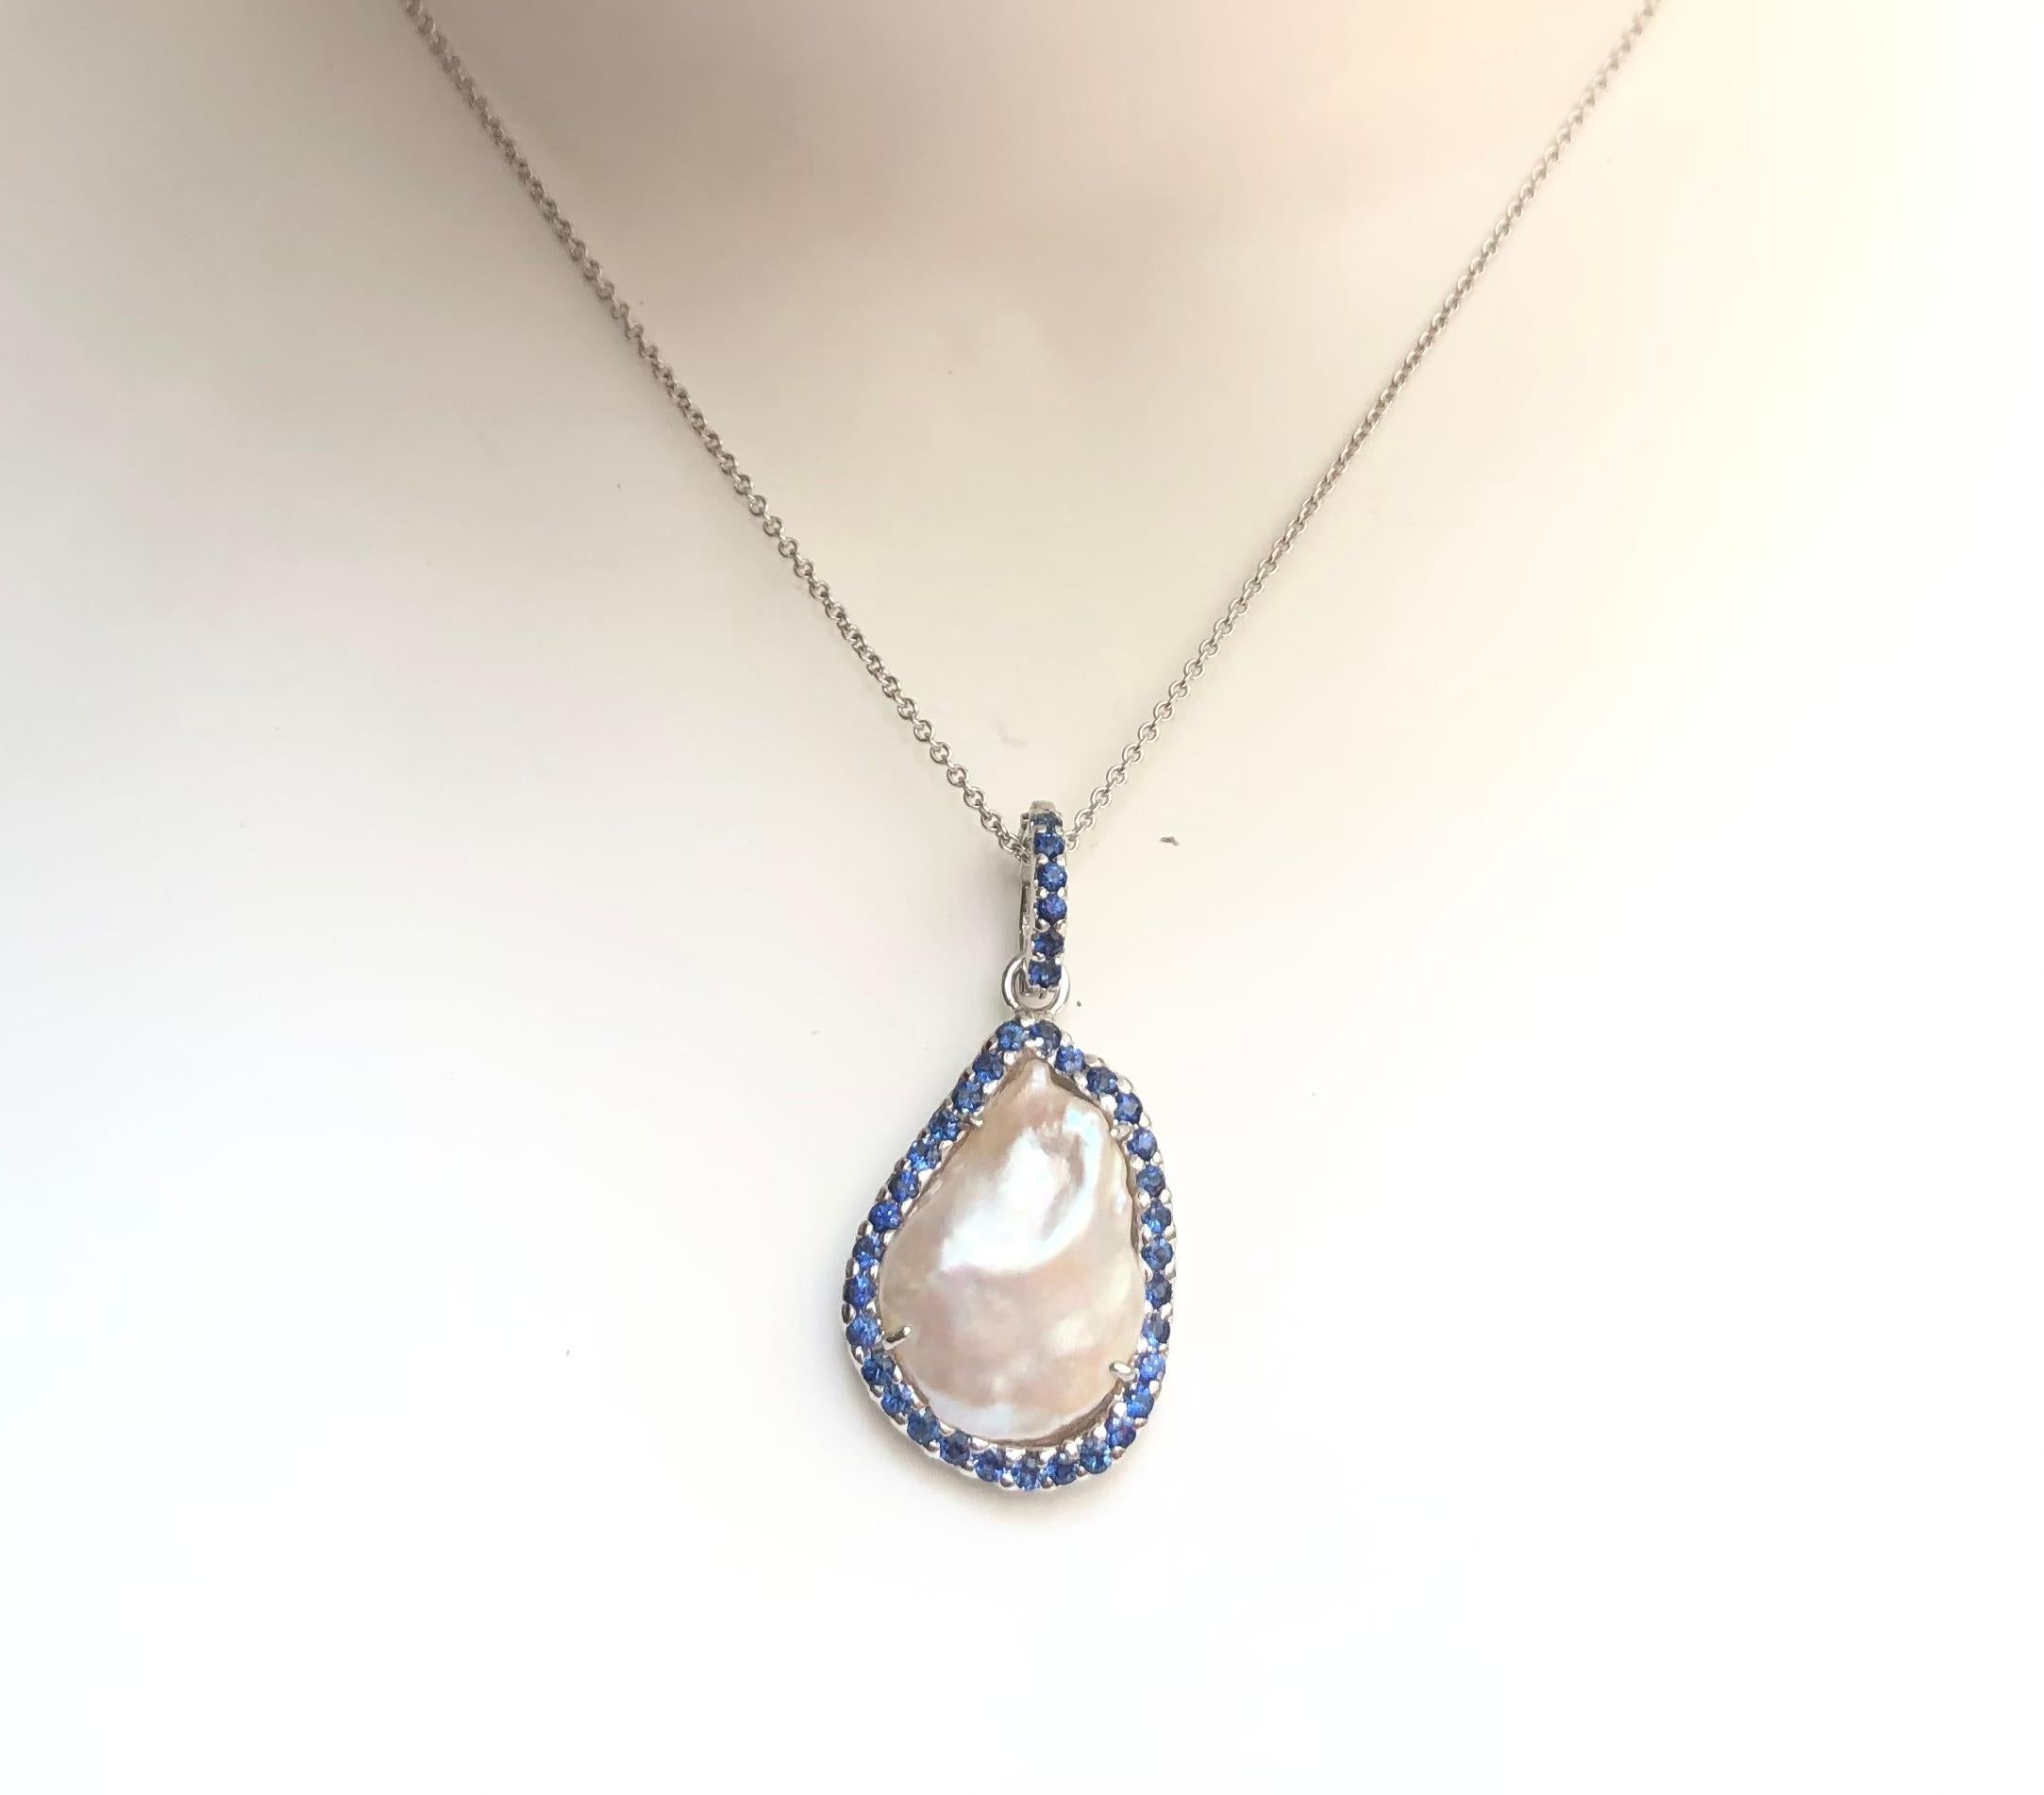 Fresh Water Pearl with Blue Sapphire 1.0 carat Pendant set in 18 Karat White Gold Settings
(chain not included)

Width:  1.8 cm 
Length: 3.6 cm
Total Weight: 5.09 grams

